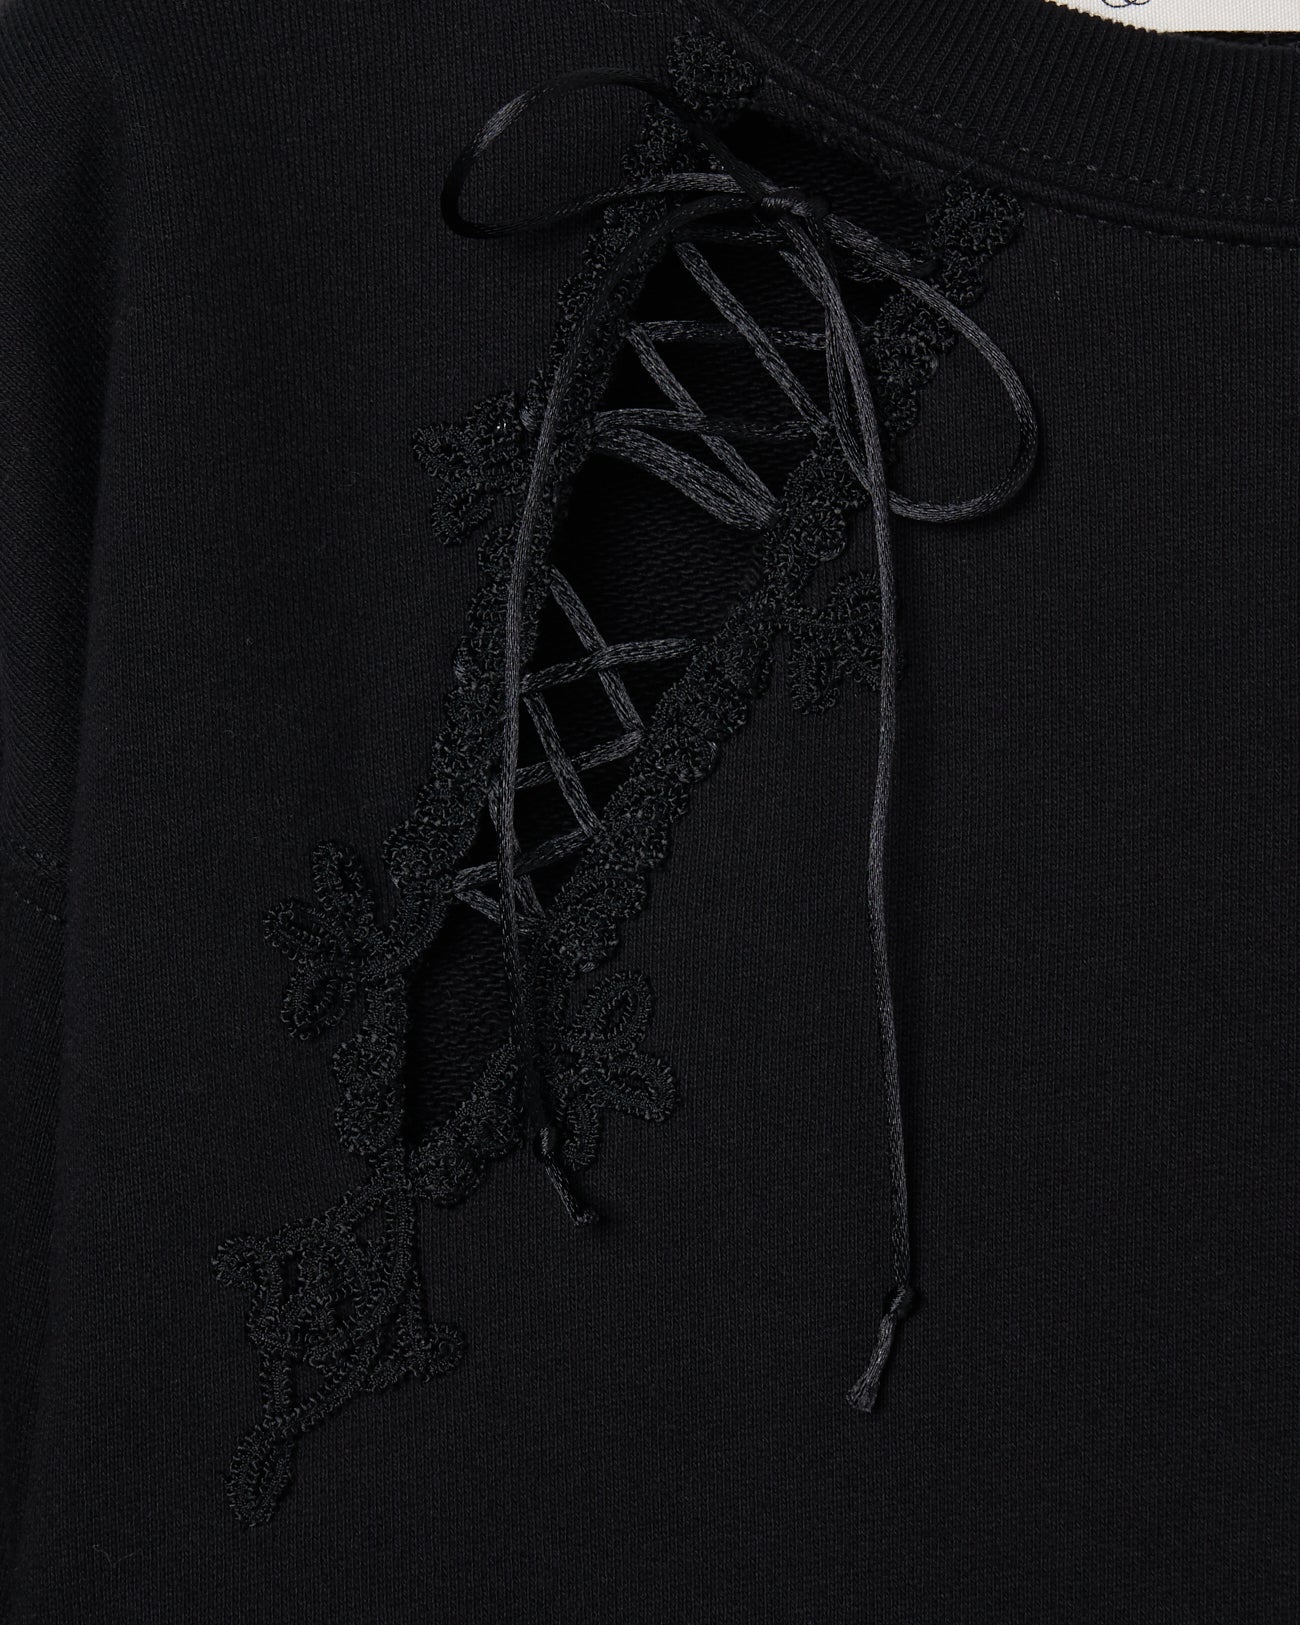 【STUDIOUS Special item】lace up darts pullover Black【stock】